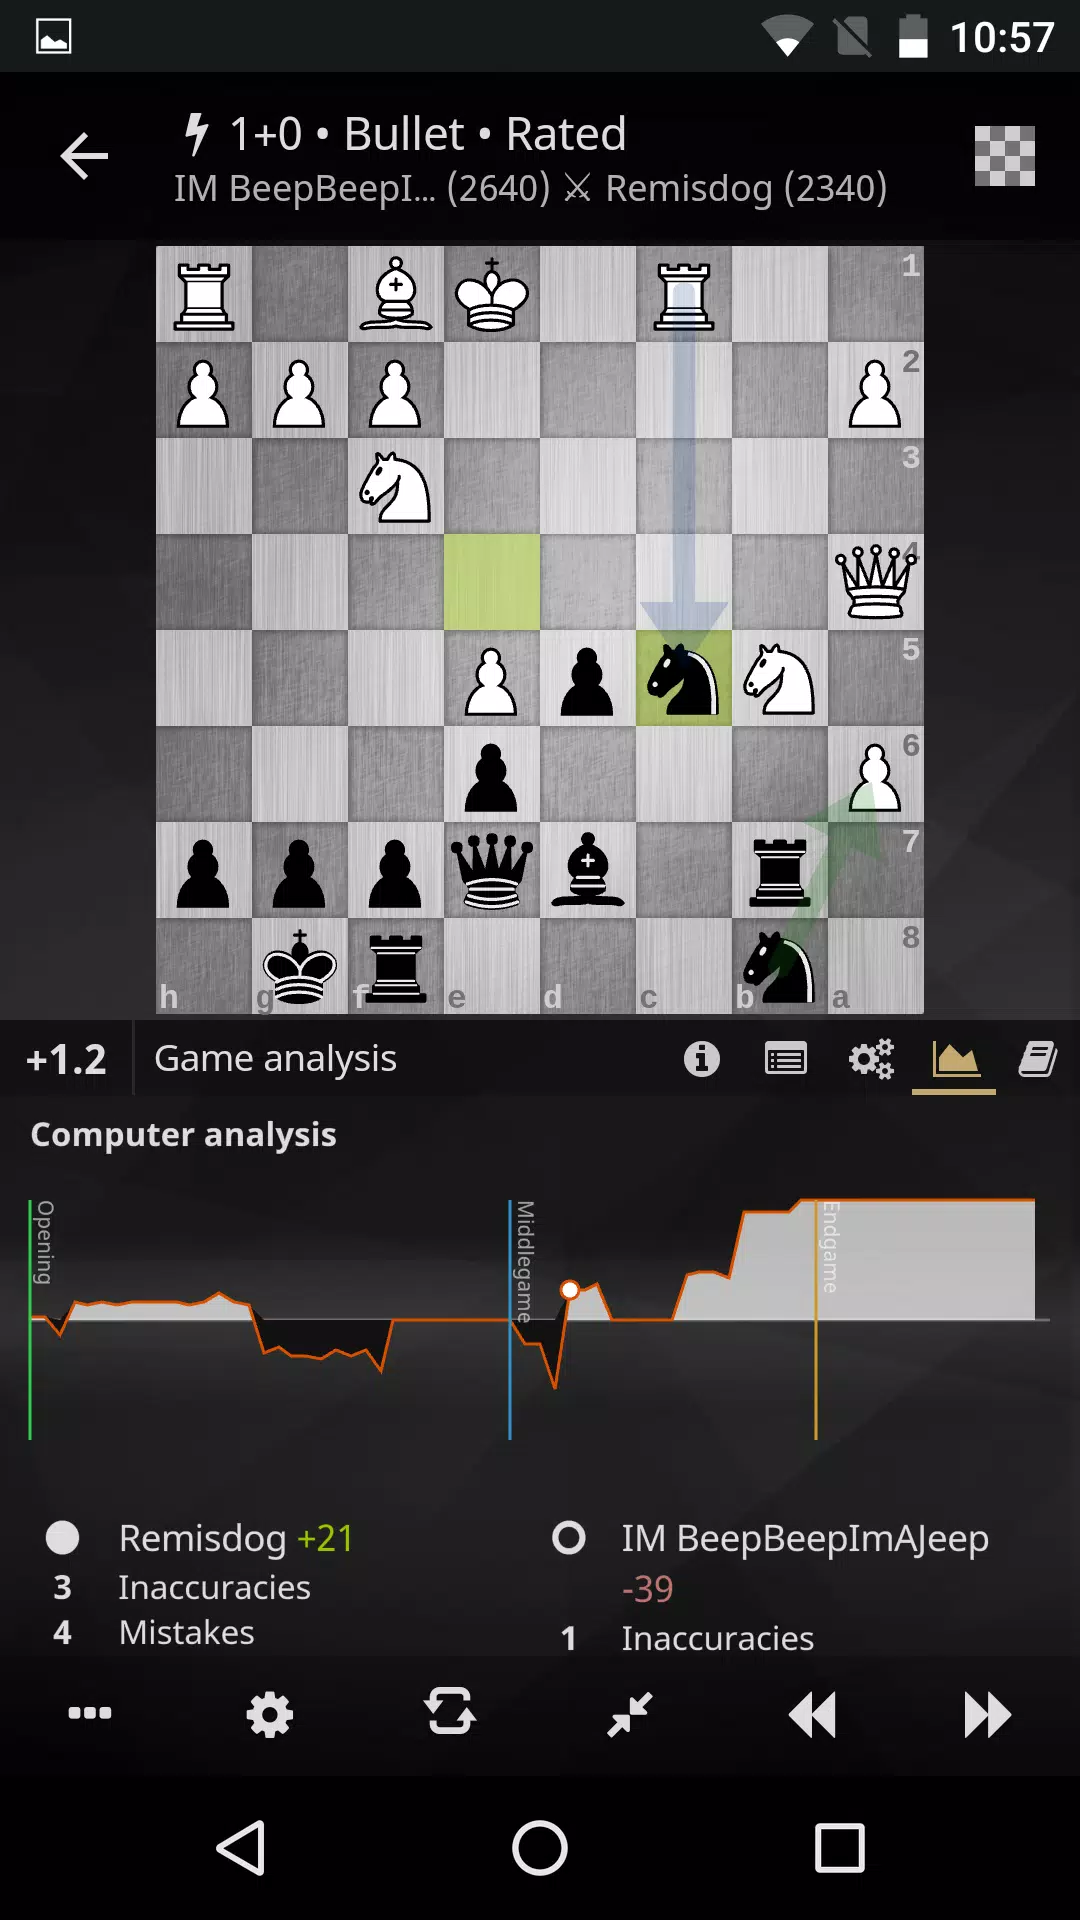 Lichess TV APK for Android Download